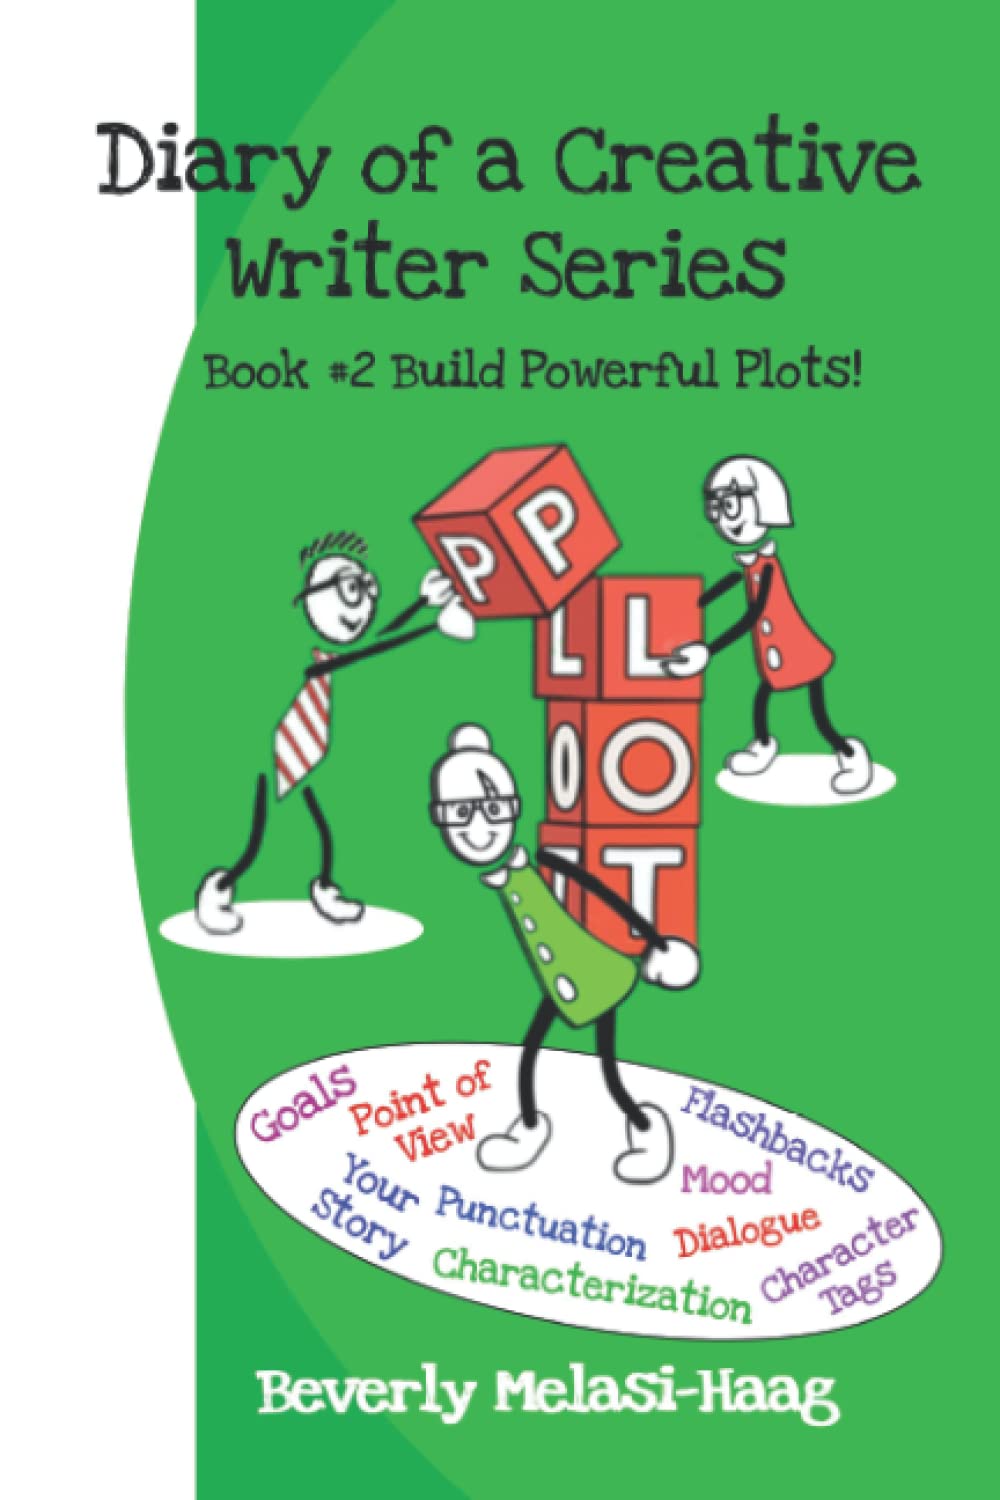 Diary of a Creative Writer Series: Book #2 Build Powerful Plots